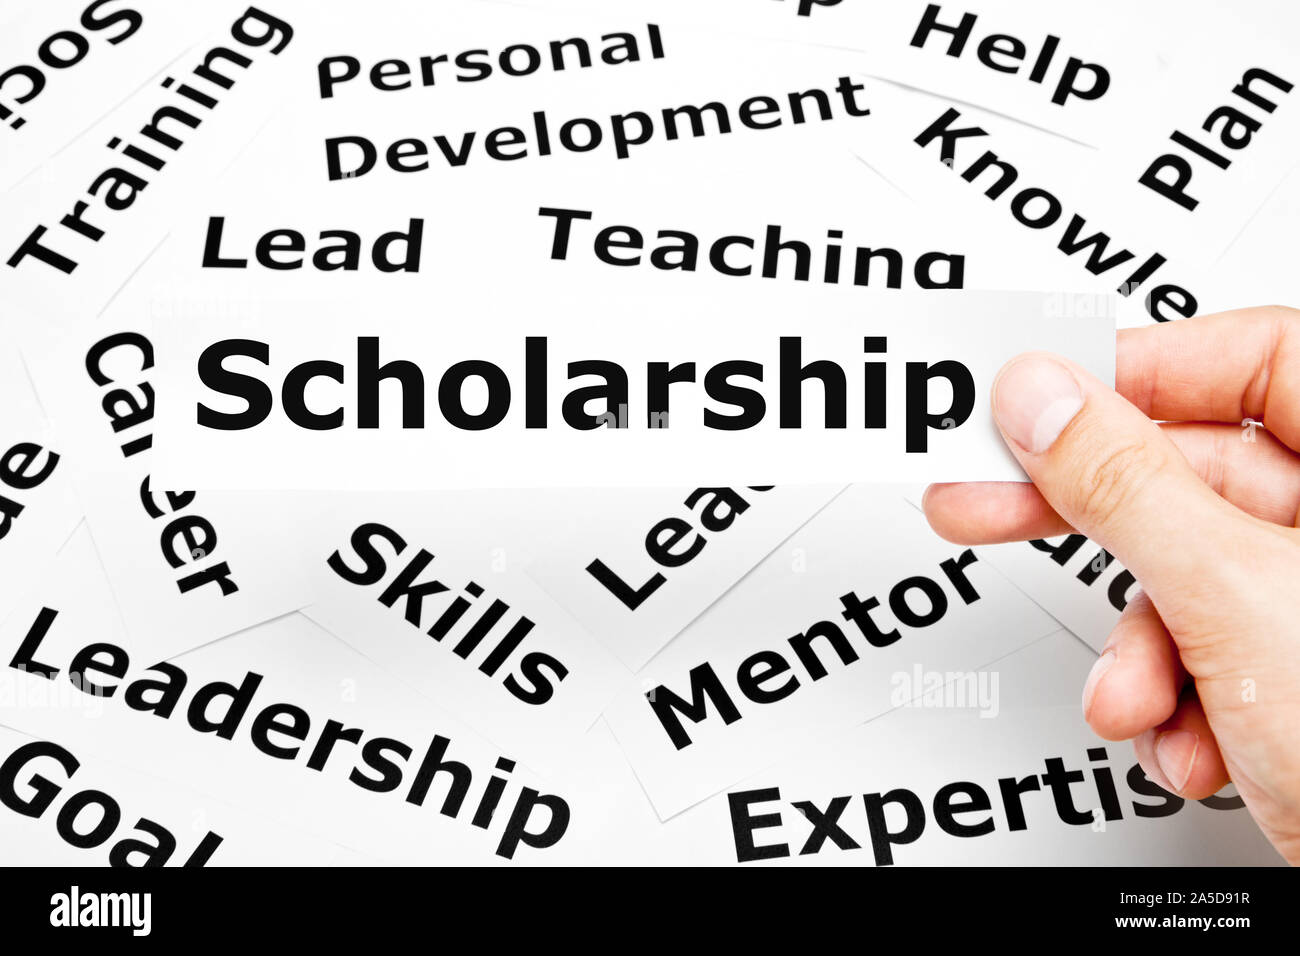 Hand holding a piece of paper with the word Scholarship printed on it above other related words in the background. Stock Photo